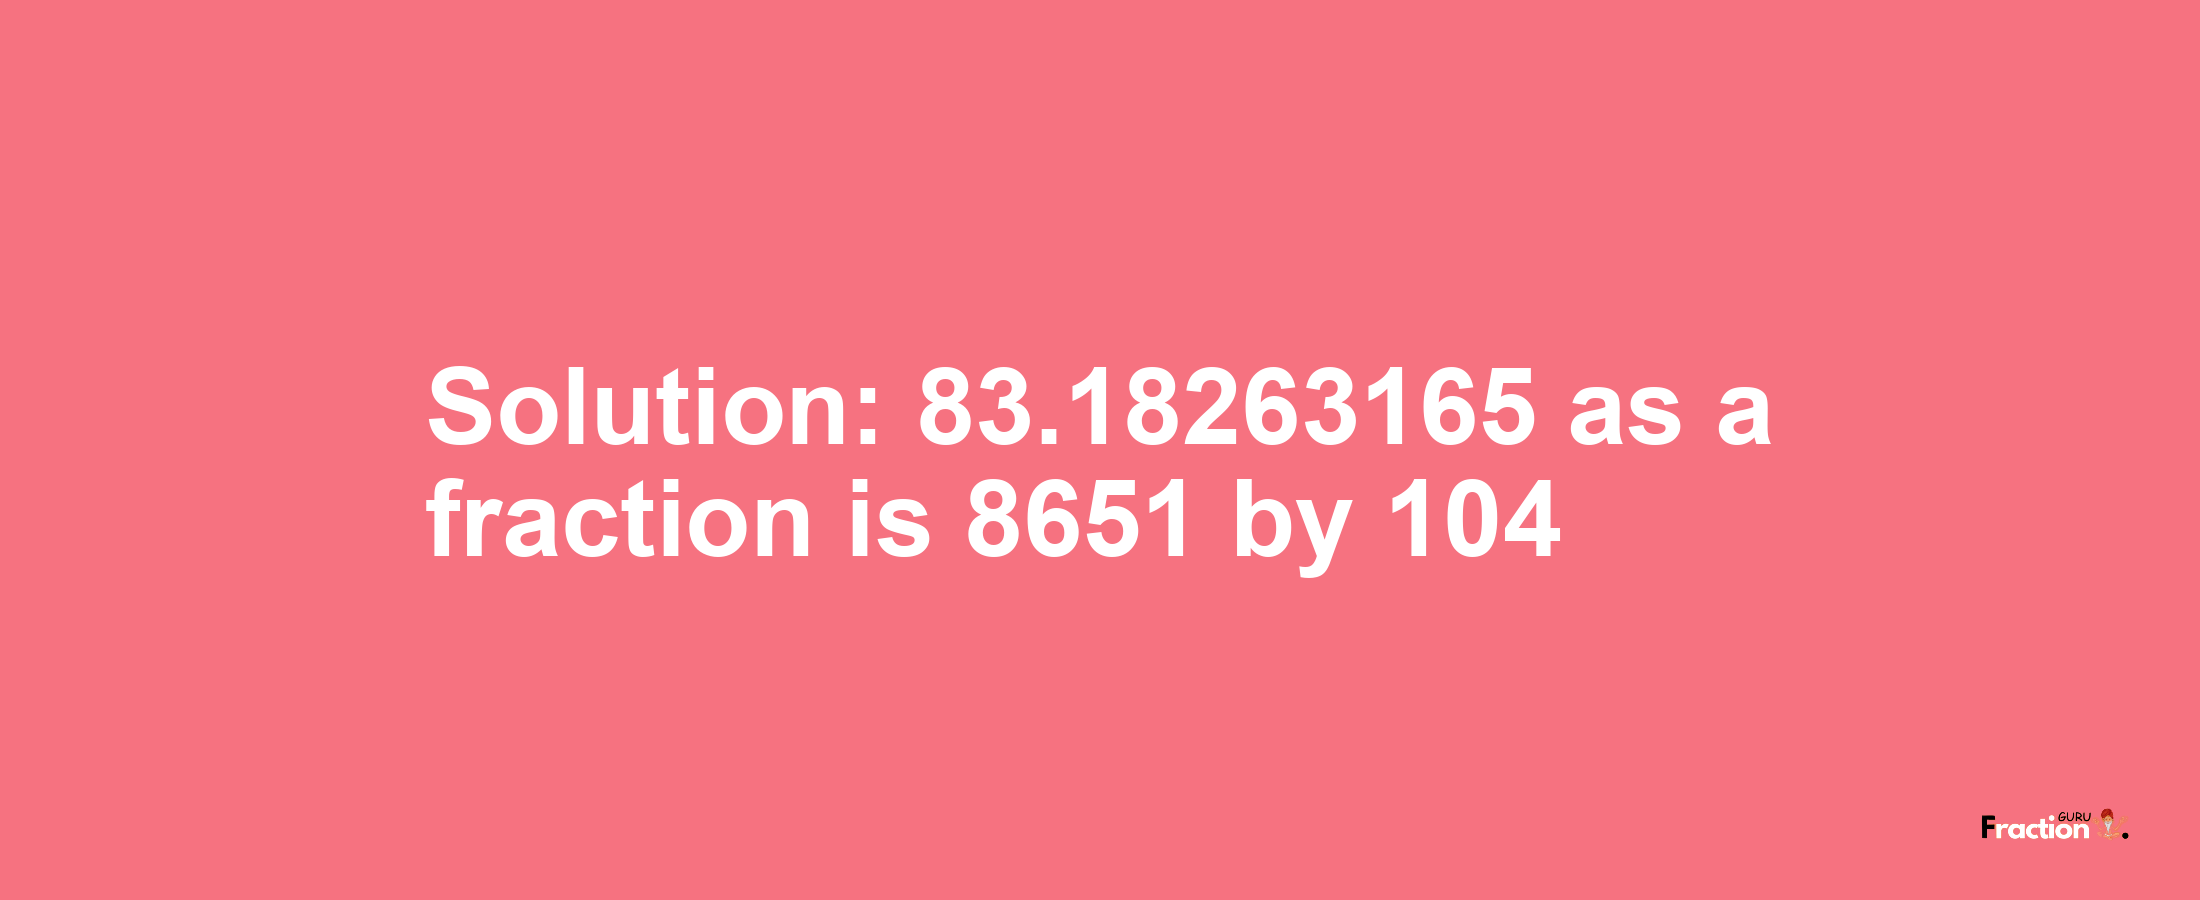 Solution:83.18263165 as a fraction is 8651/104